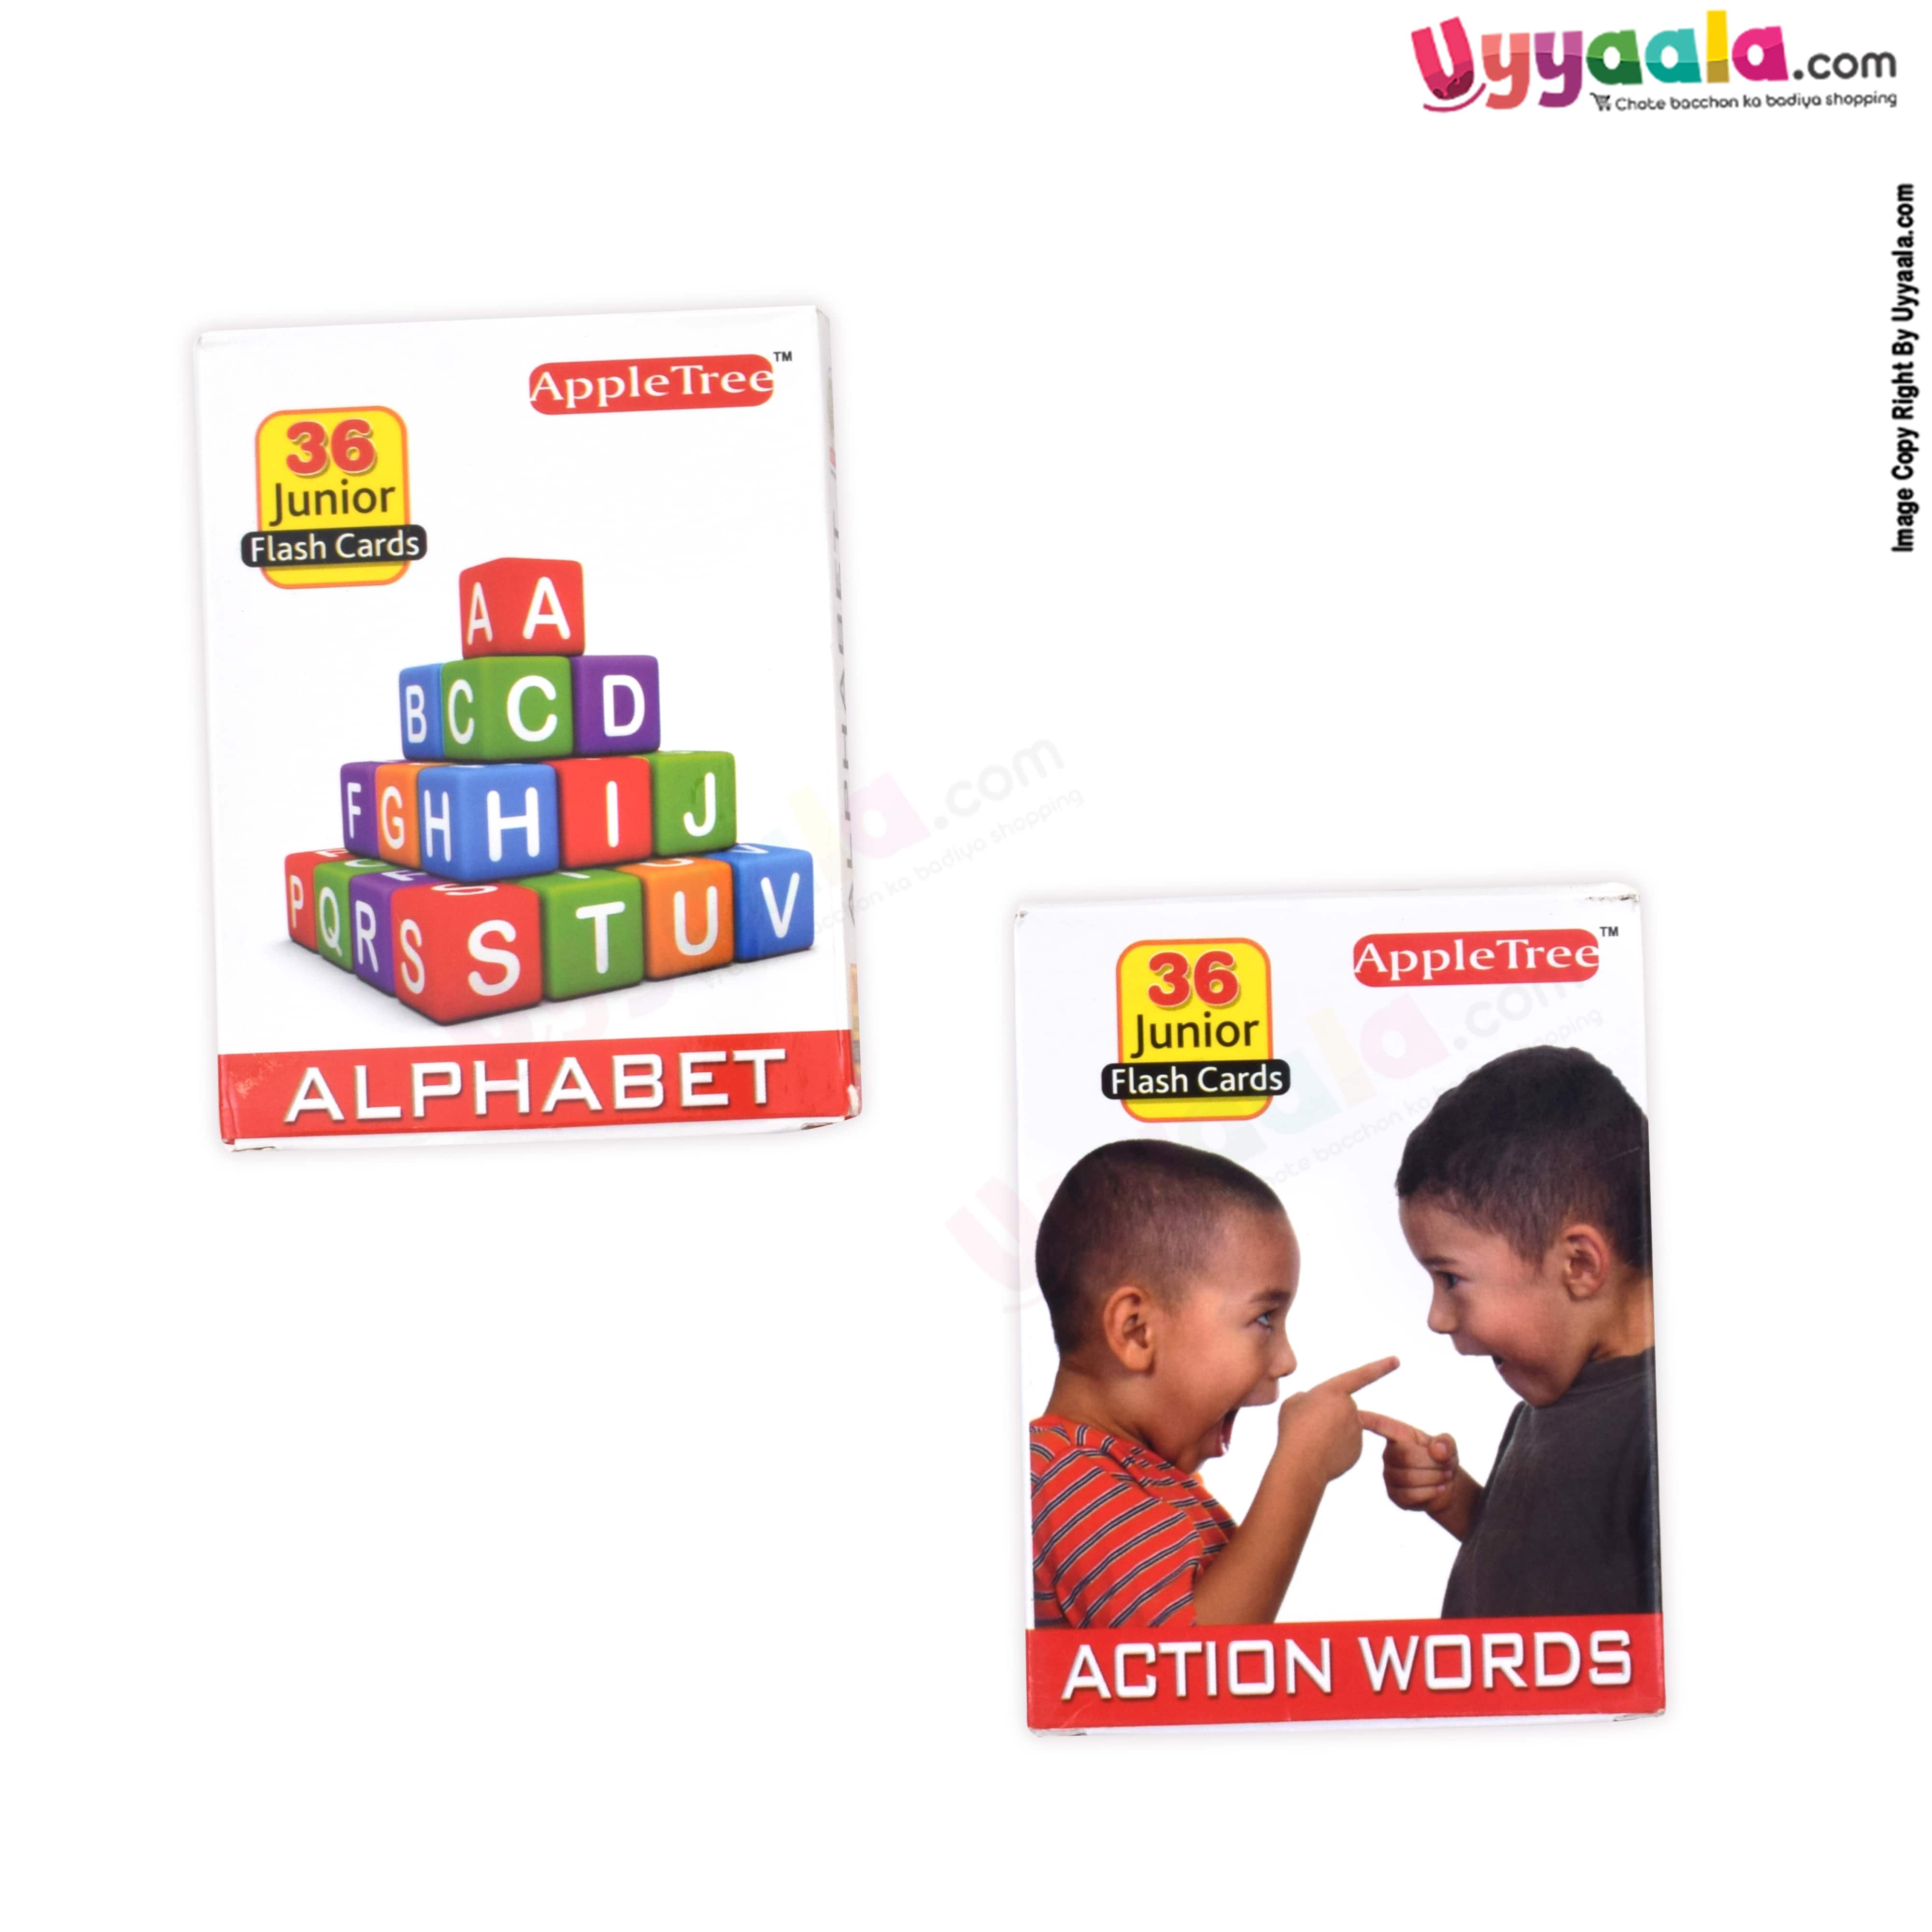 Apple Tree junior flash cards pack of 2 - action Words & alphabets